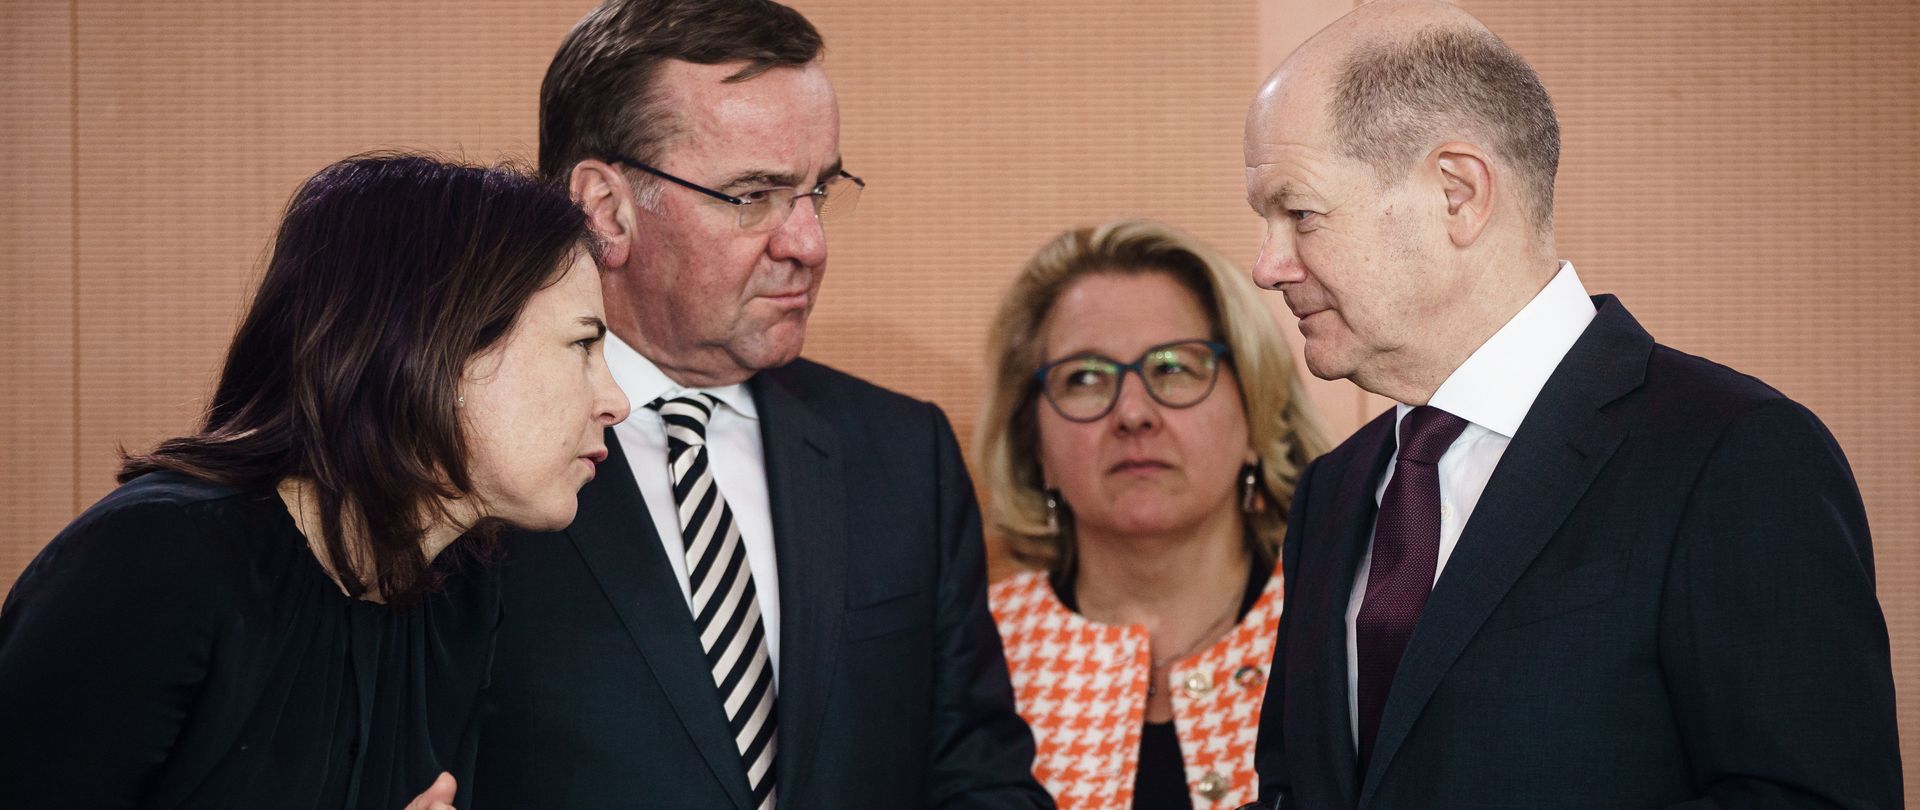 (L-R) German Foreign Minister Annalena Baerbock, German Defense Minister Boris Pistorius, German Minister for Economic Cooperation and Development Svenja Schulze and German Chancellor Olaf Scholz at the Chancellery in Berlin, Germany, March 2023.